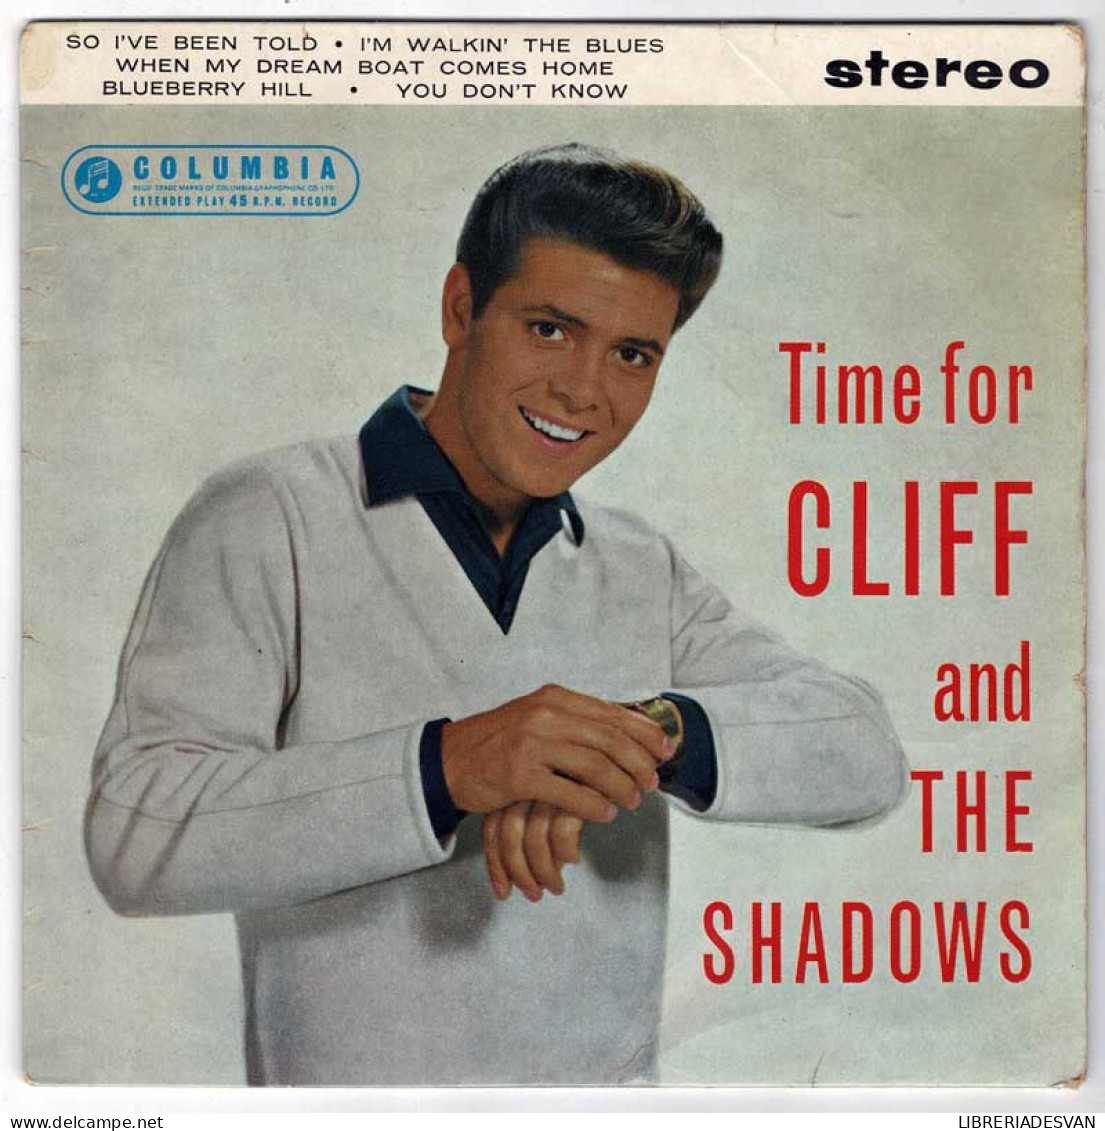 Cliff Richard - Time For Cliff And The Shadows. EP UK ESG 7887 - Unclassified